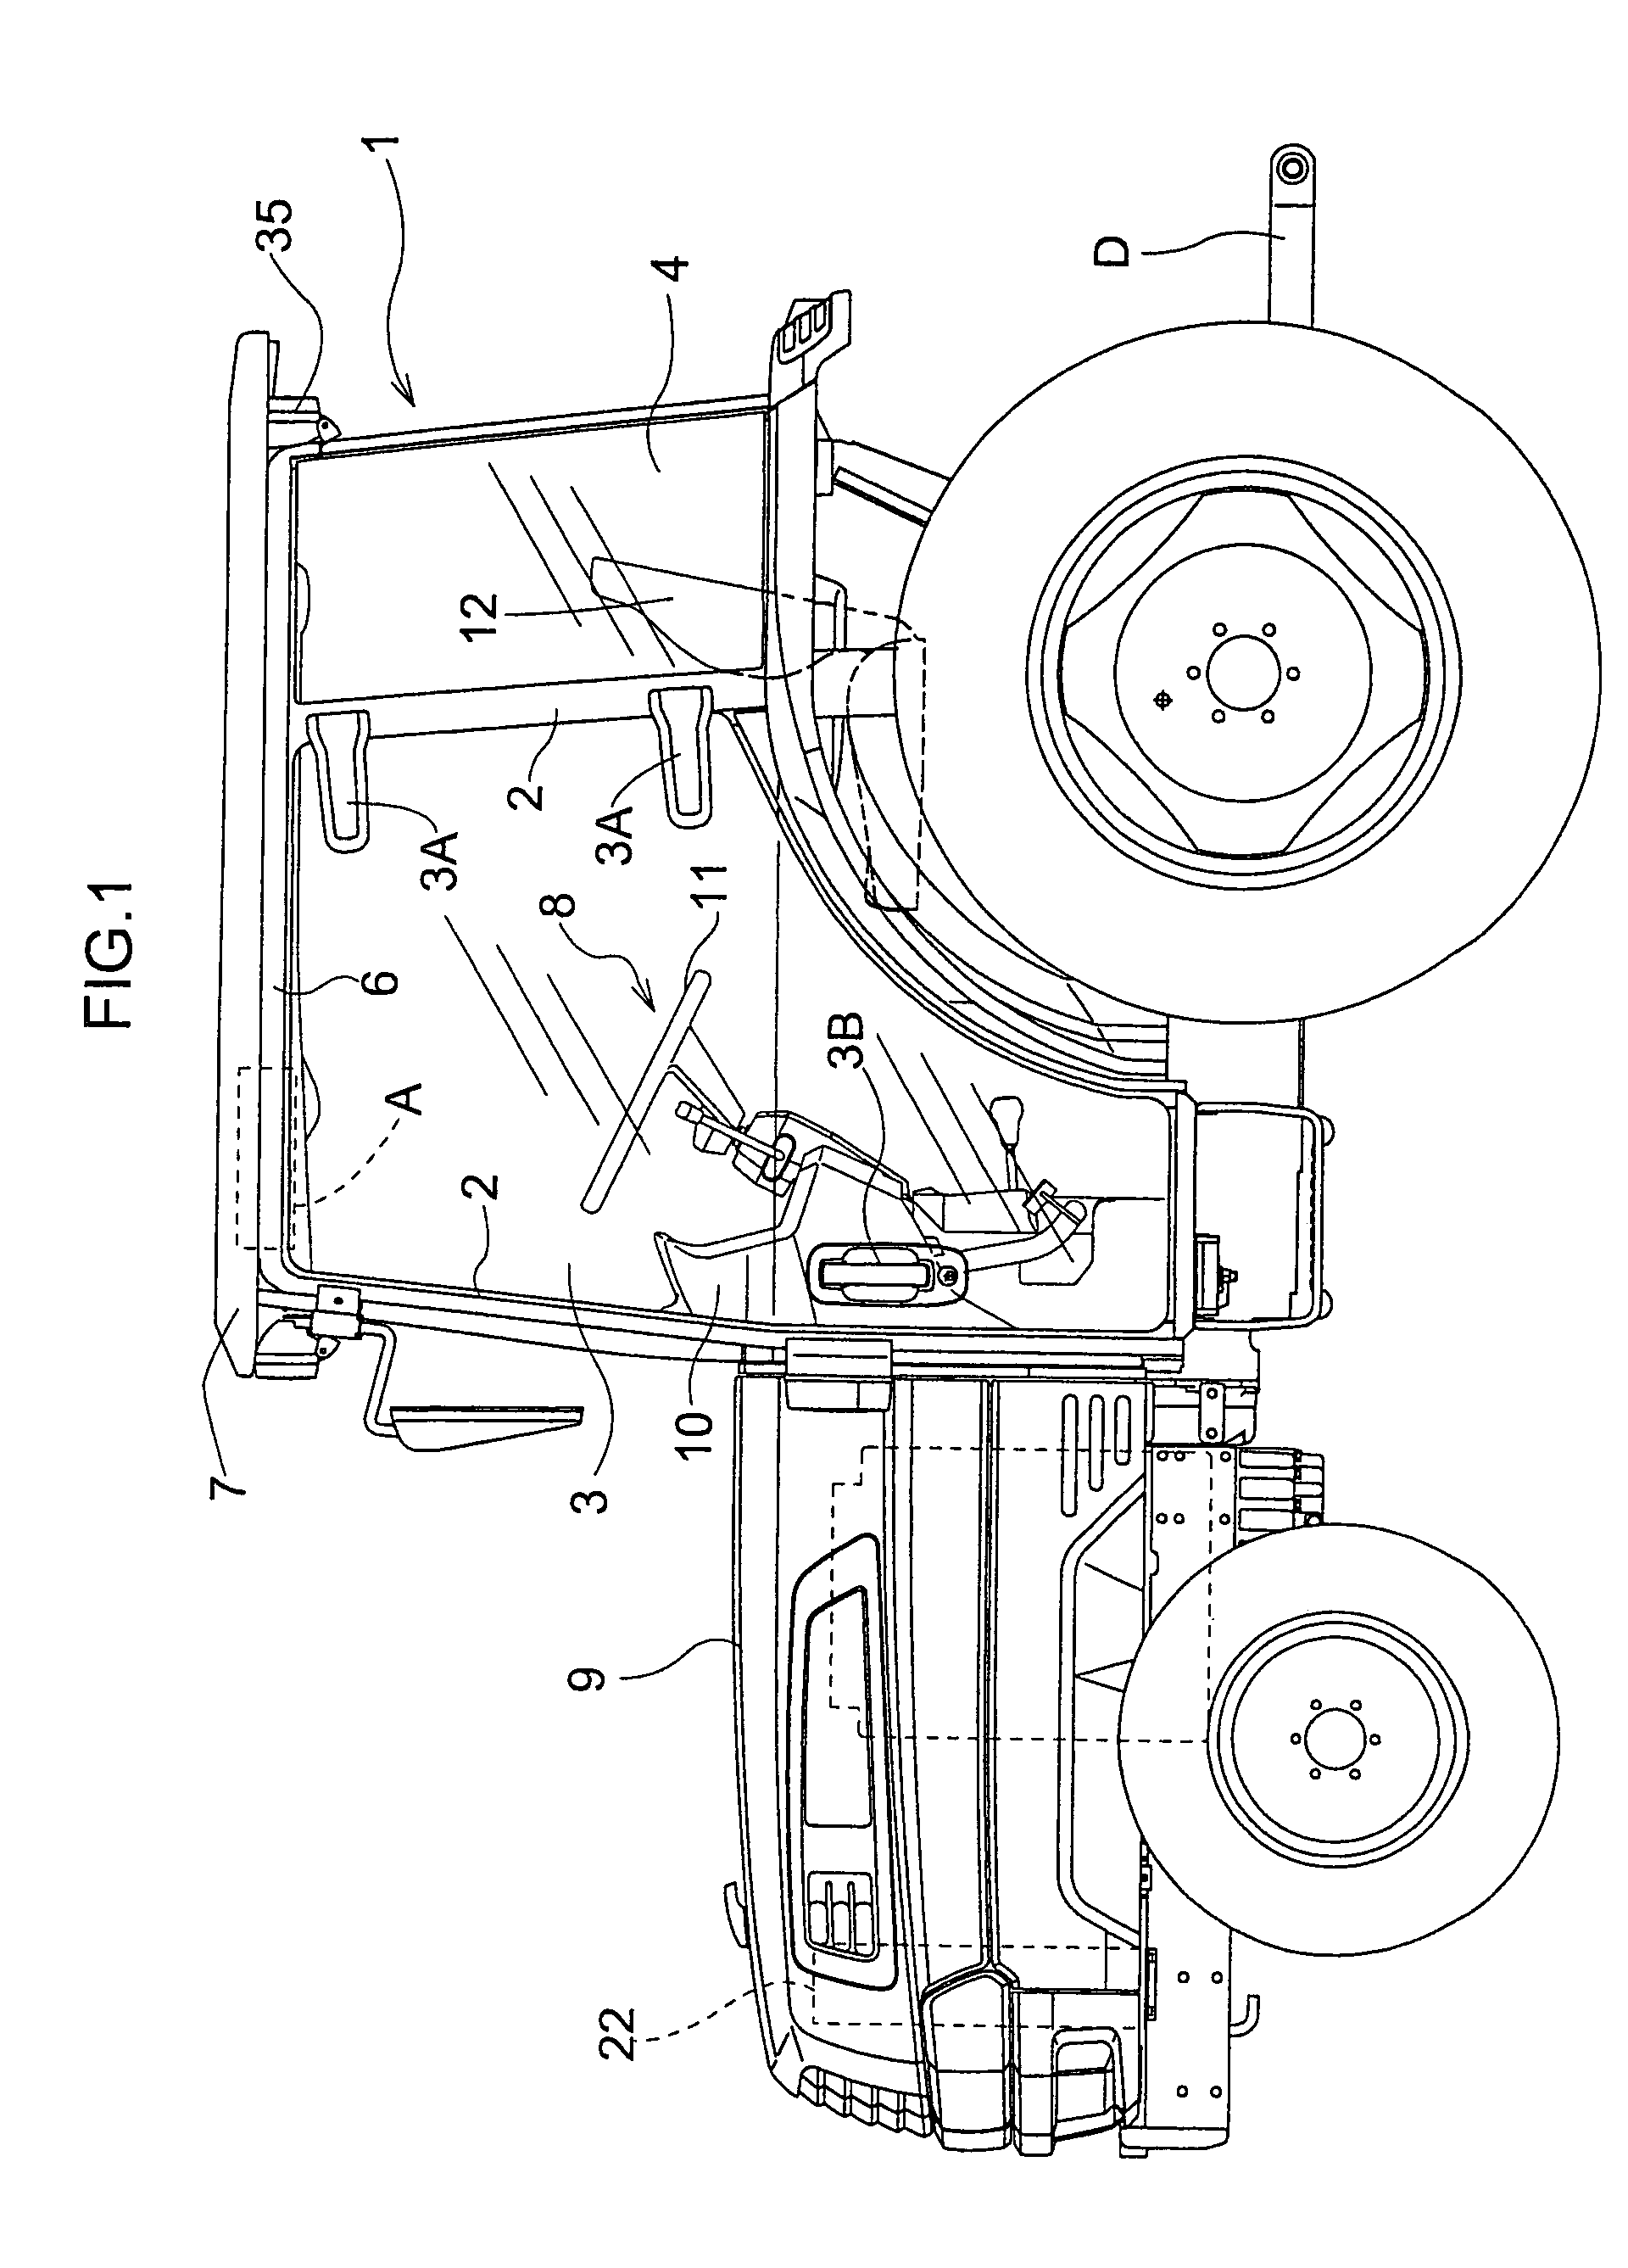 Work-vehicle cabin having air-conditioning unit